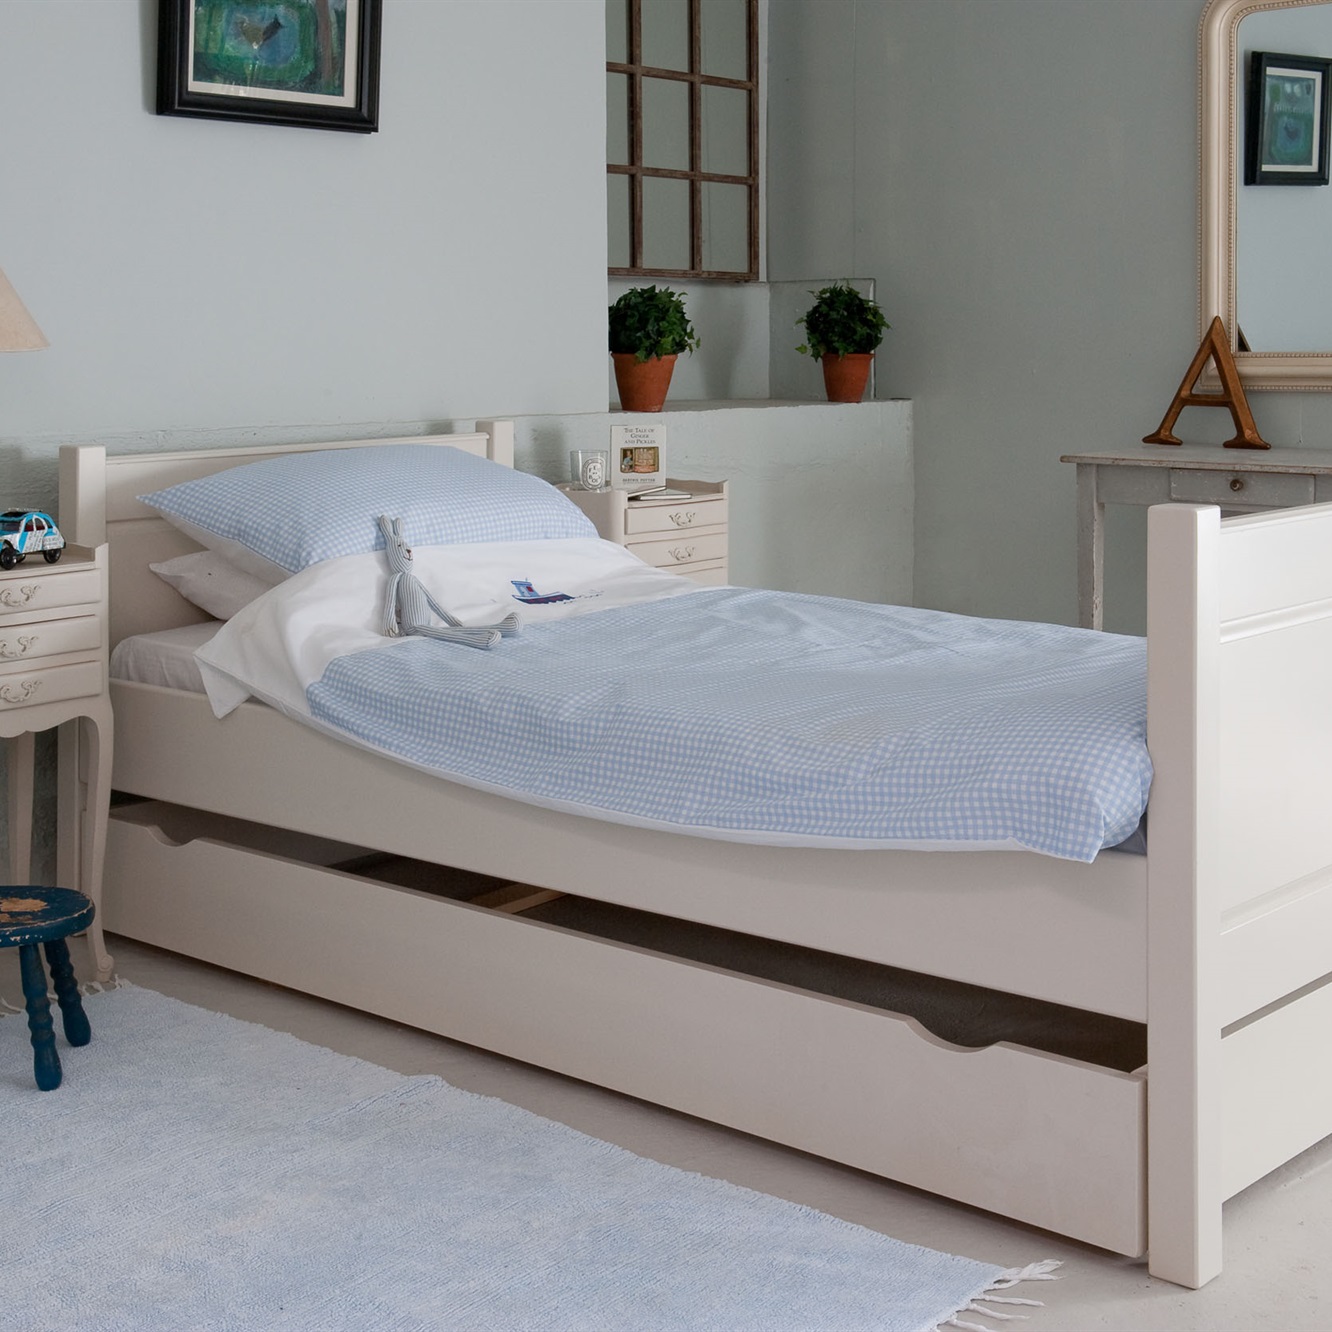 New England bed with underbed storage